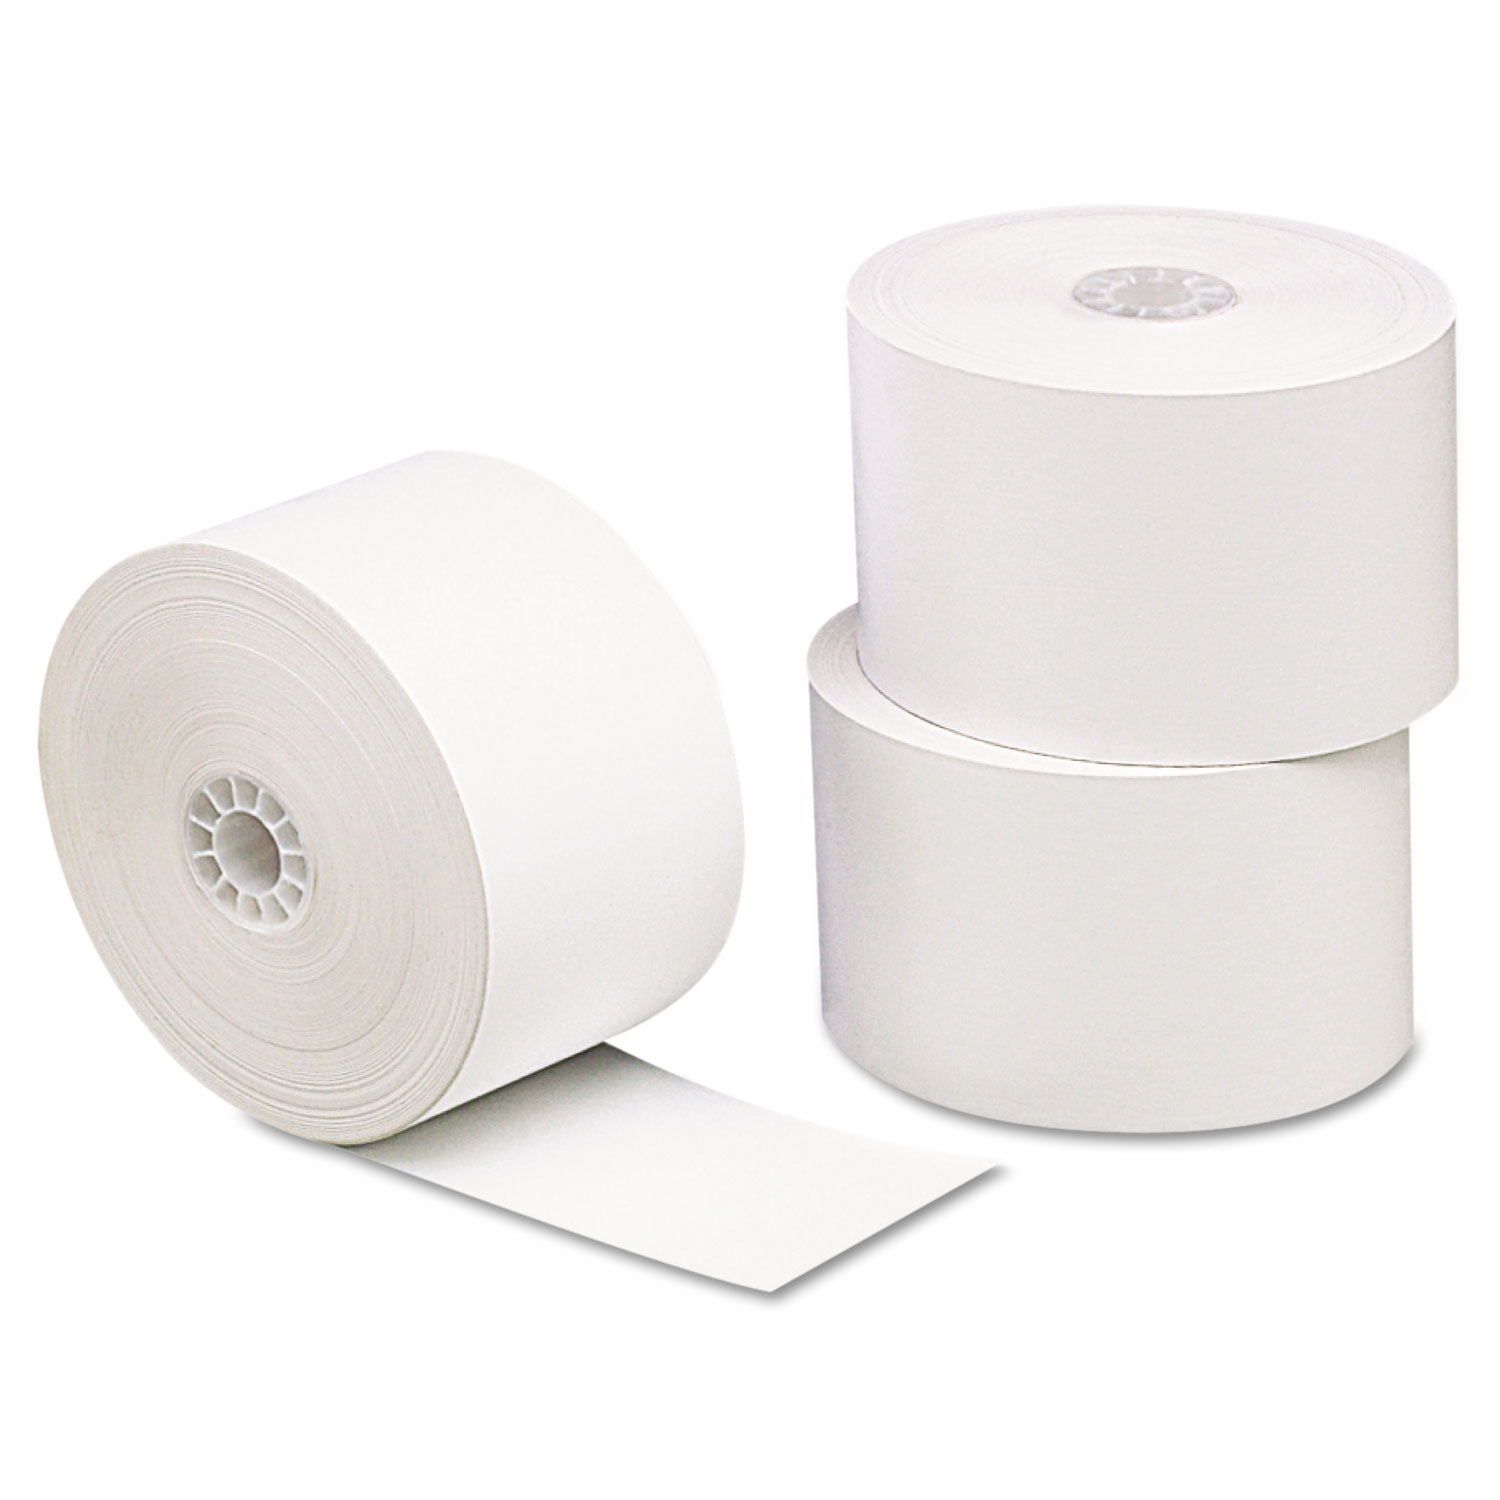  Universal UNV35711 Direct Thermal Printing Paper Rolls, 1.75 x 230 ft, White, 10/Pack (UNV35711) 